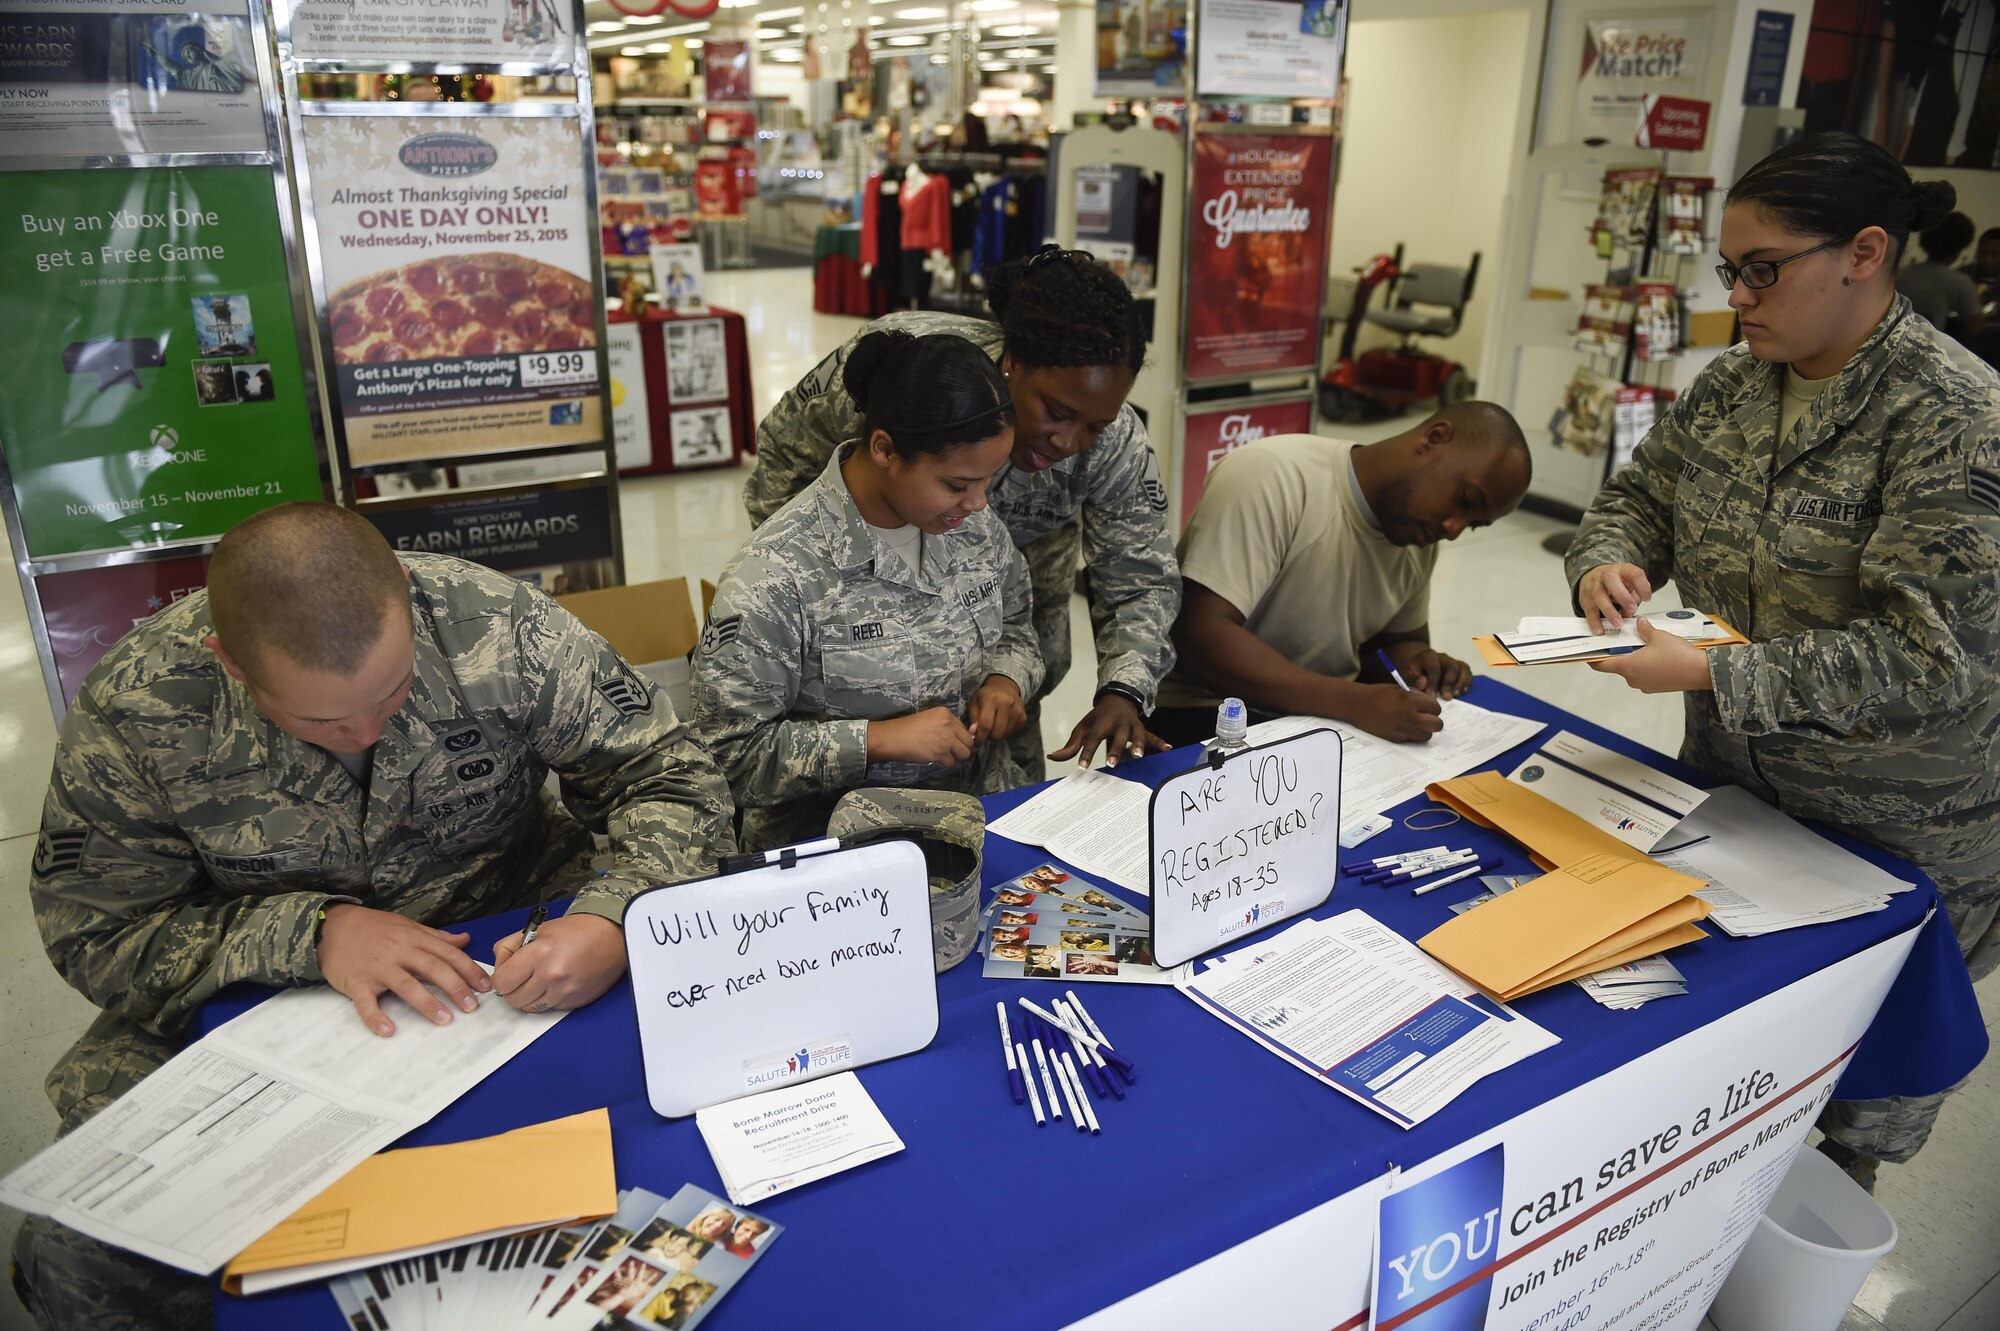 Air Commandos fill out forms during a bone marrow donor drive at Hurlburt Field, Fla., Nov. 17, 2015. The forms will be used to add Department of Defense members to the National Marrow Donor program. (U.S. Air Force photo by Airman Kai White)